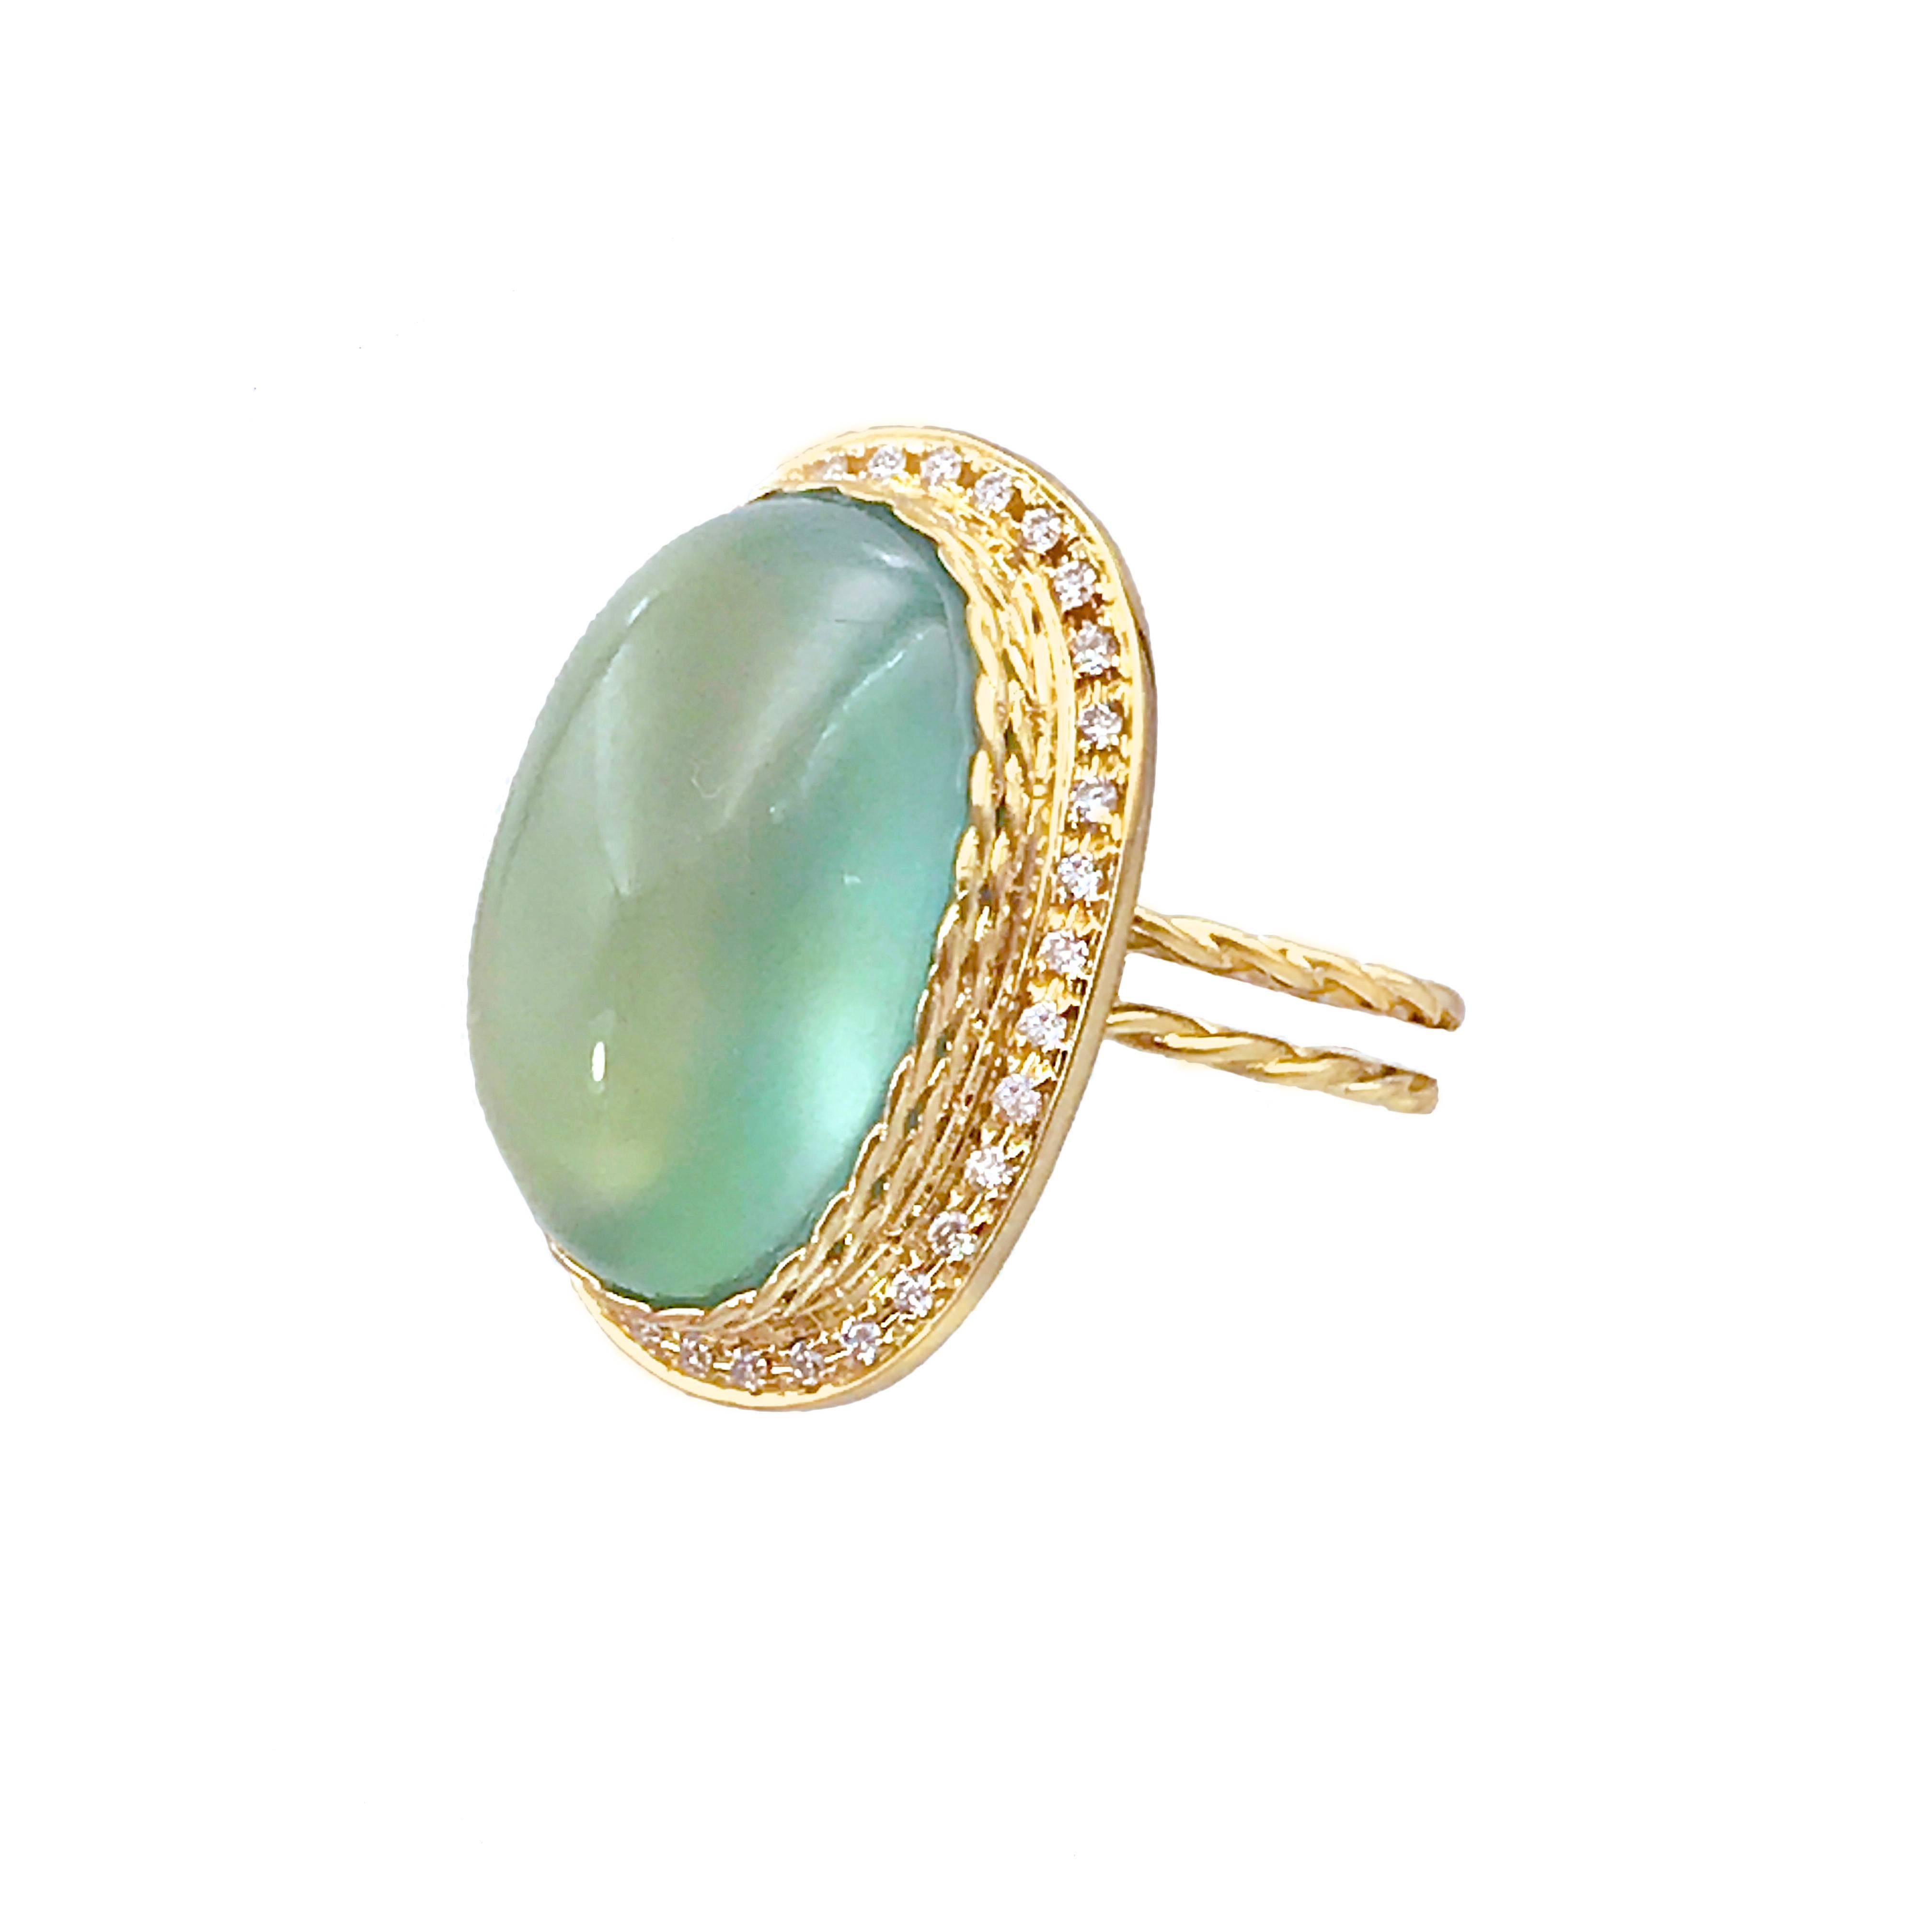 One of a Kind Prehnite Diamond Halo Cocktail Ring 18 Karat in Stock For Sale